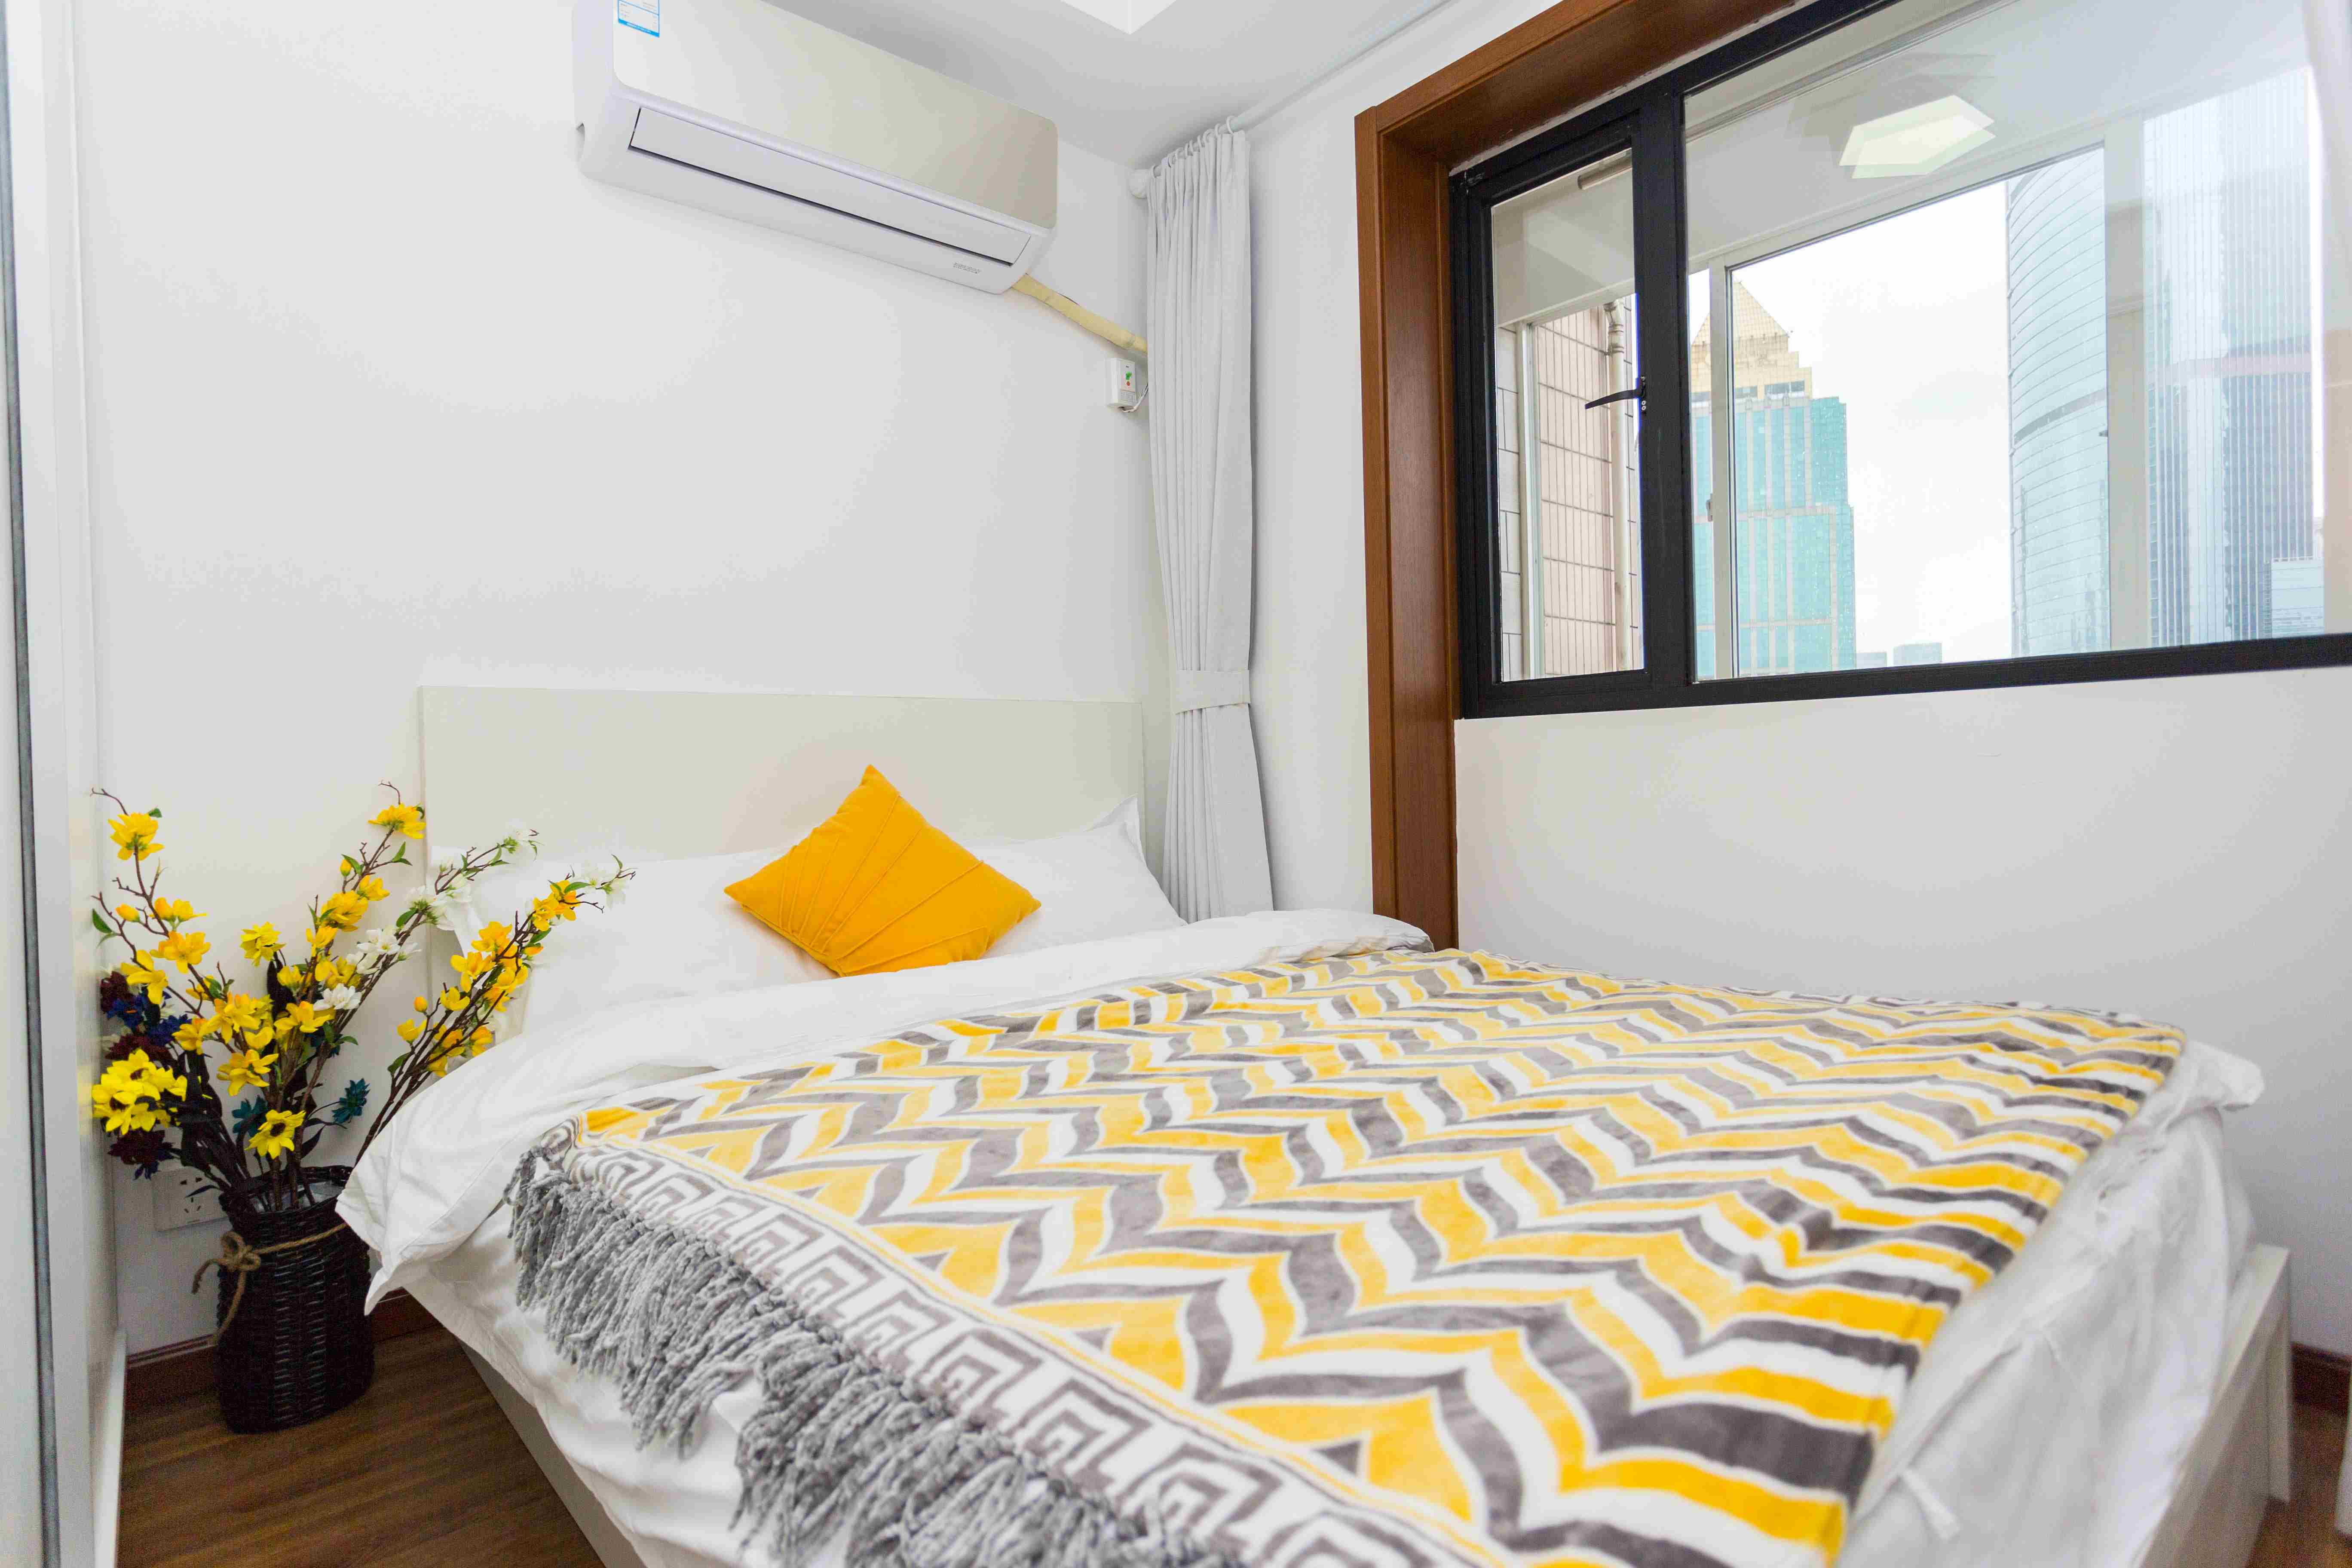 Bright Bedrooom Bright 4BR Fantastic Views & Convenient W Nanjing Rd LN 2/12/13 for Rent in Shanghai